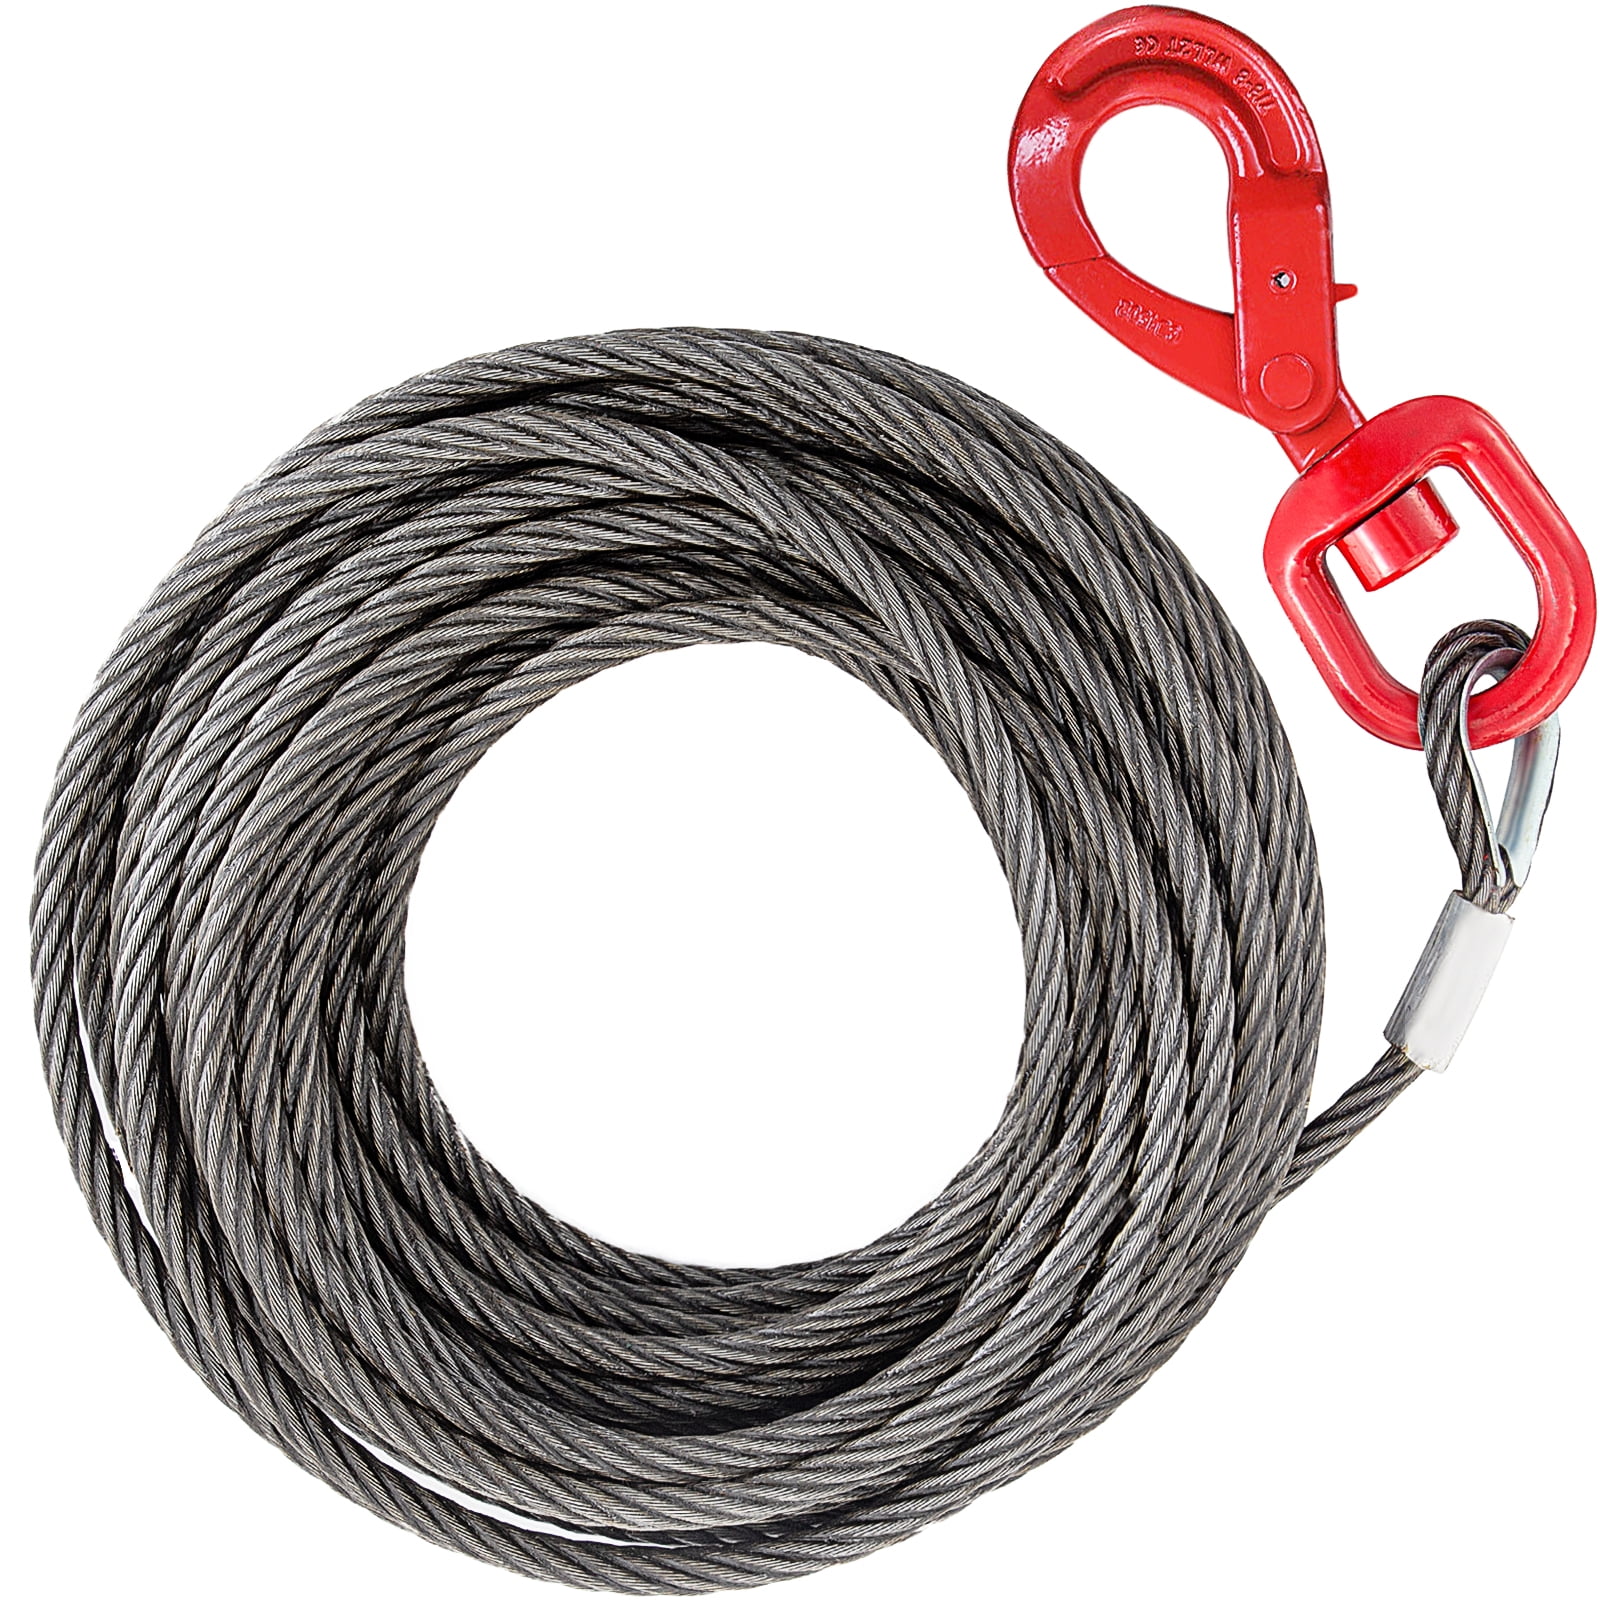 VEVOR Galvanized Steel Winch Cable, 3/8 x 100' - Wire Rope with Hook, 8800  lbs Breaking Strength - Towing Cable Heavy Duty, 6x19 Strand Core - for  Rollback, Crane, Wrecker, Tow Truck 